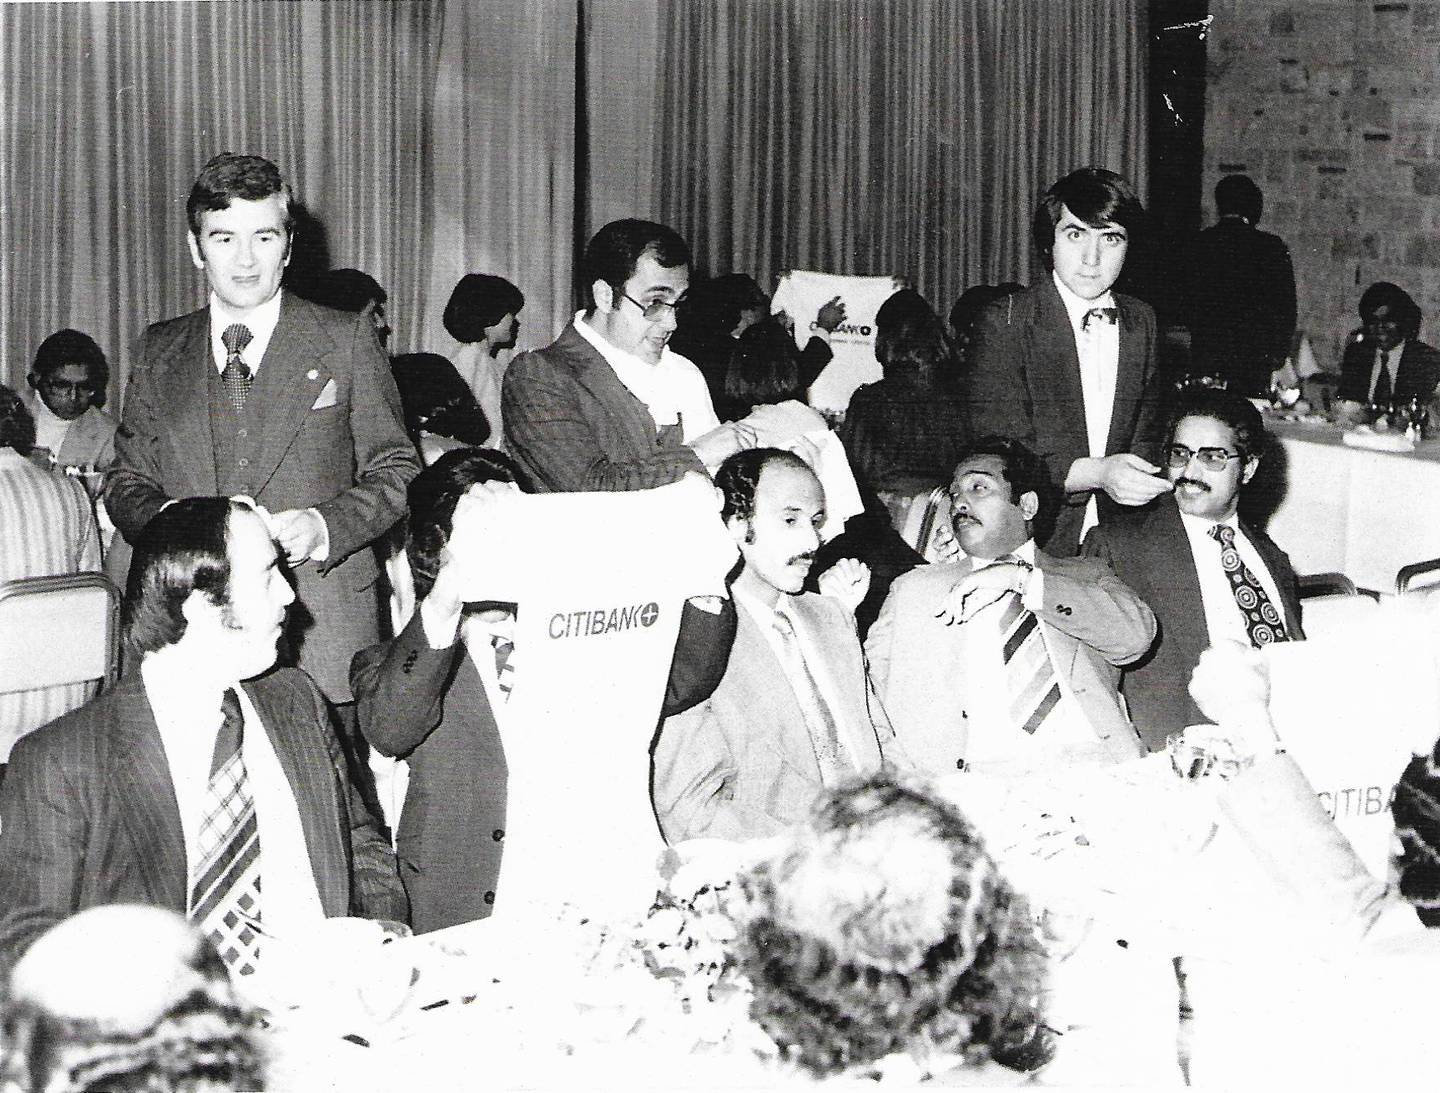 George Kanaan, middle, distributing T-shirts as mementos at a dinner following a session at the MENA training centre of Citibank Athens in 1976. Photo: George Kanaan